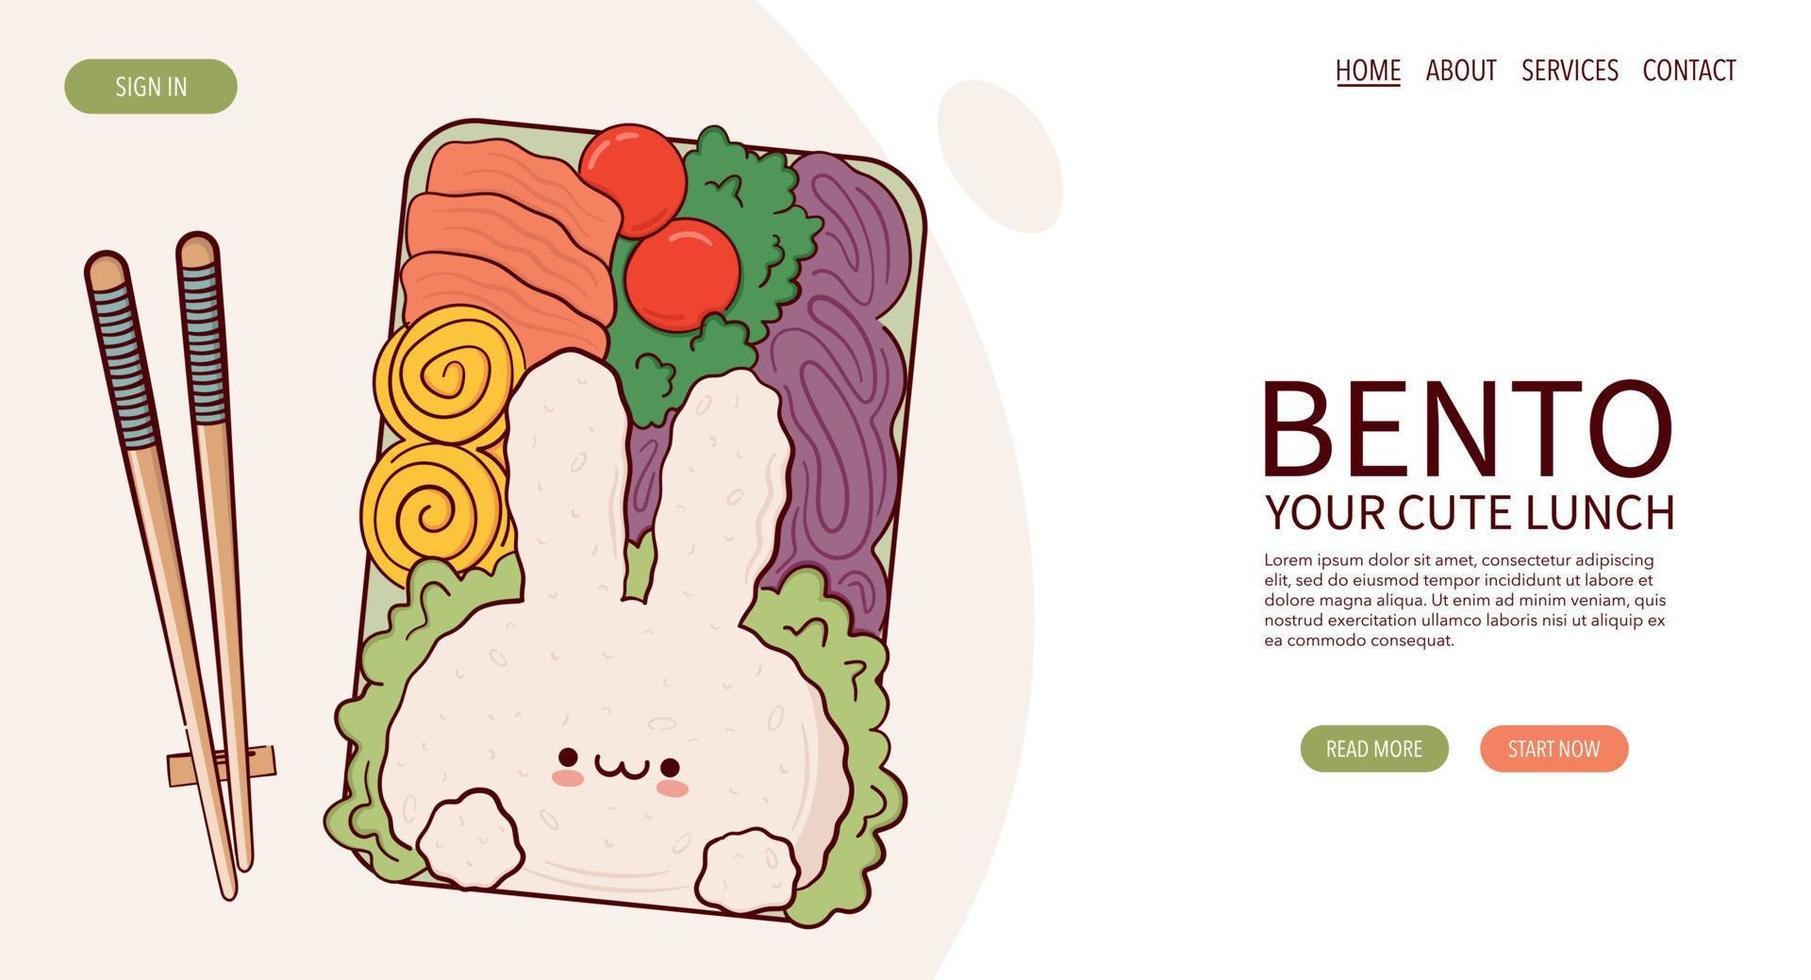 Web Page Draw funny kawaii bento box home cooking takeaway meal prep vector illustration. Japanese asian traditional  food, cooking, menu concept. Banner, website, advertising in doodle cartoon style.